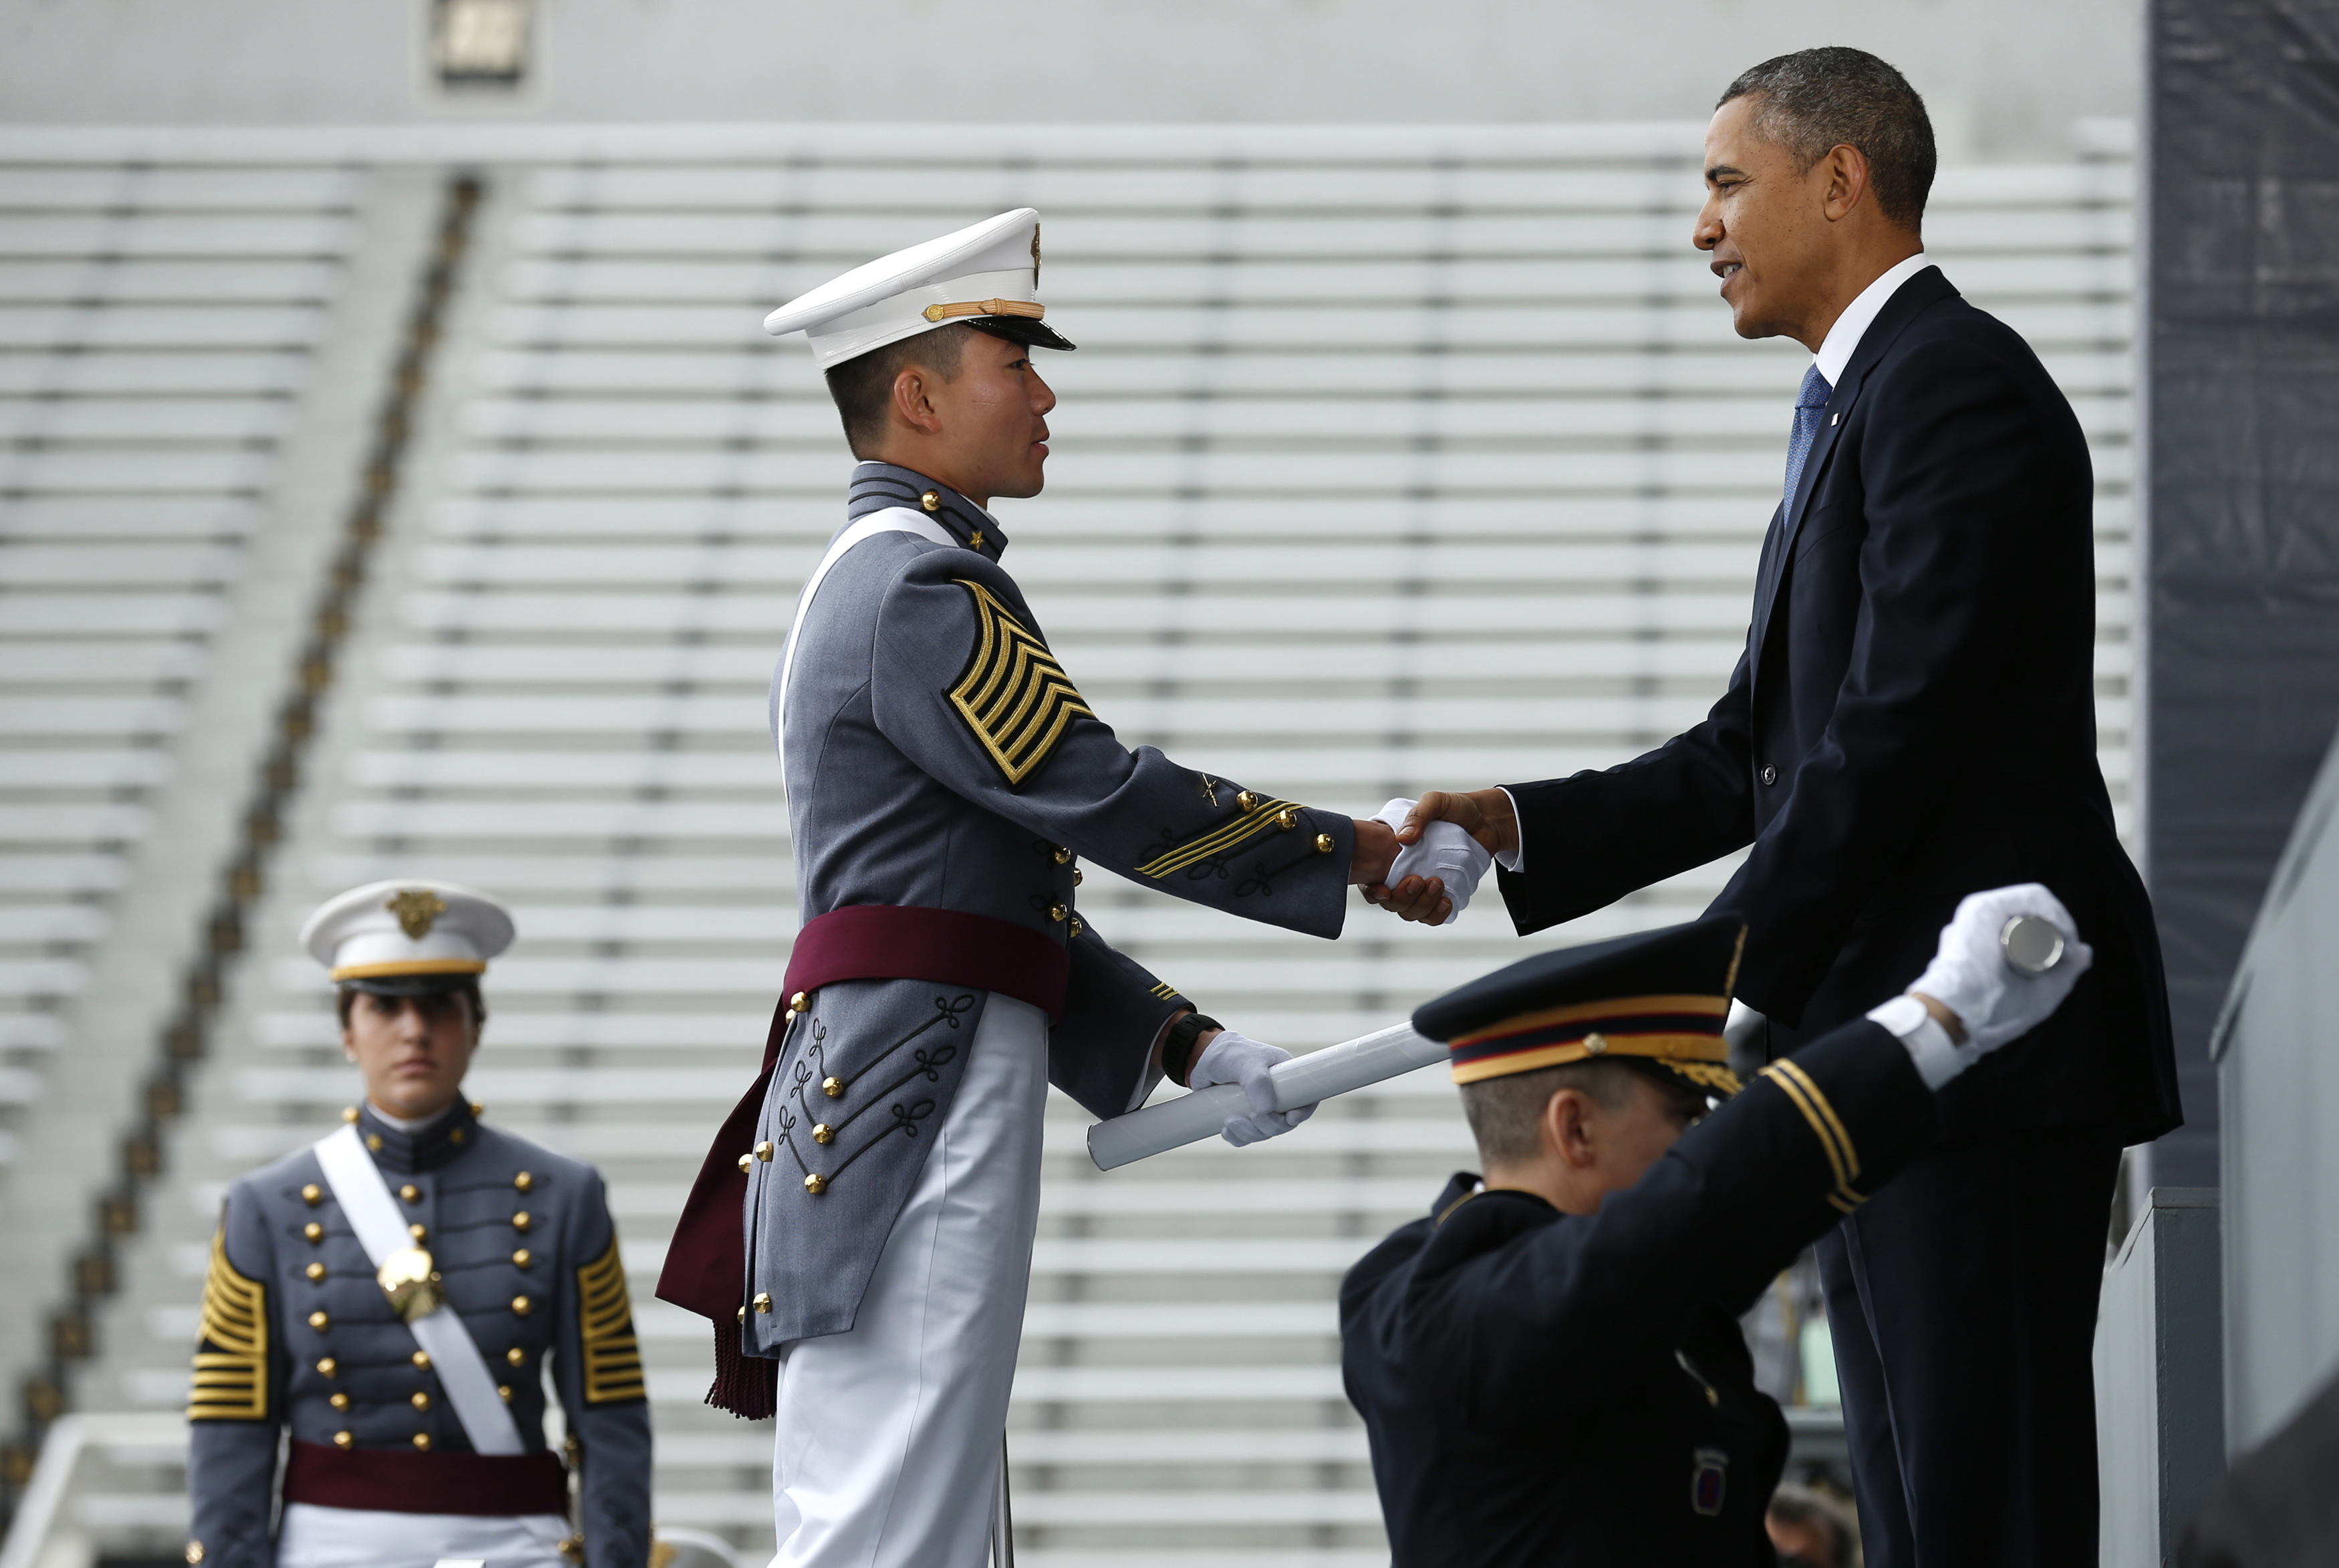 President Barack Obama hands a diploma to one of about 1,000 graduating cadets at the U.S. Military Academy at West Point, New York, on May 28. Obama’s commencement address is one of several the White House plans to lay out his foreign policy vision for the remainder of his term in office. REUTERS/Kevin Lamarque